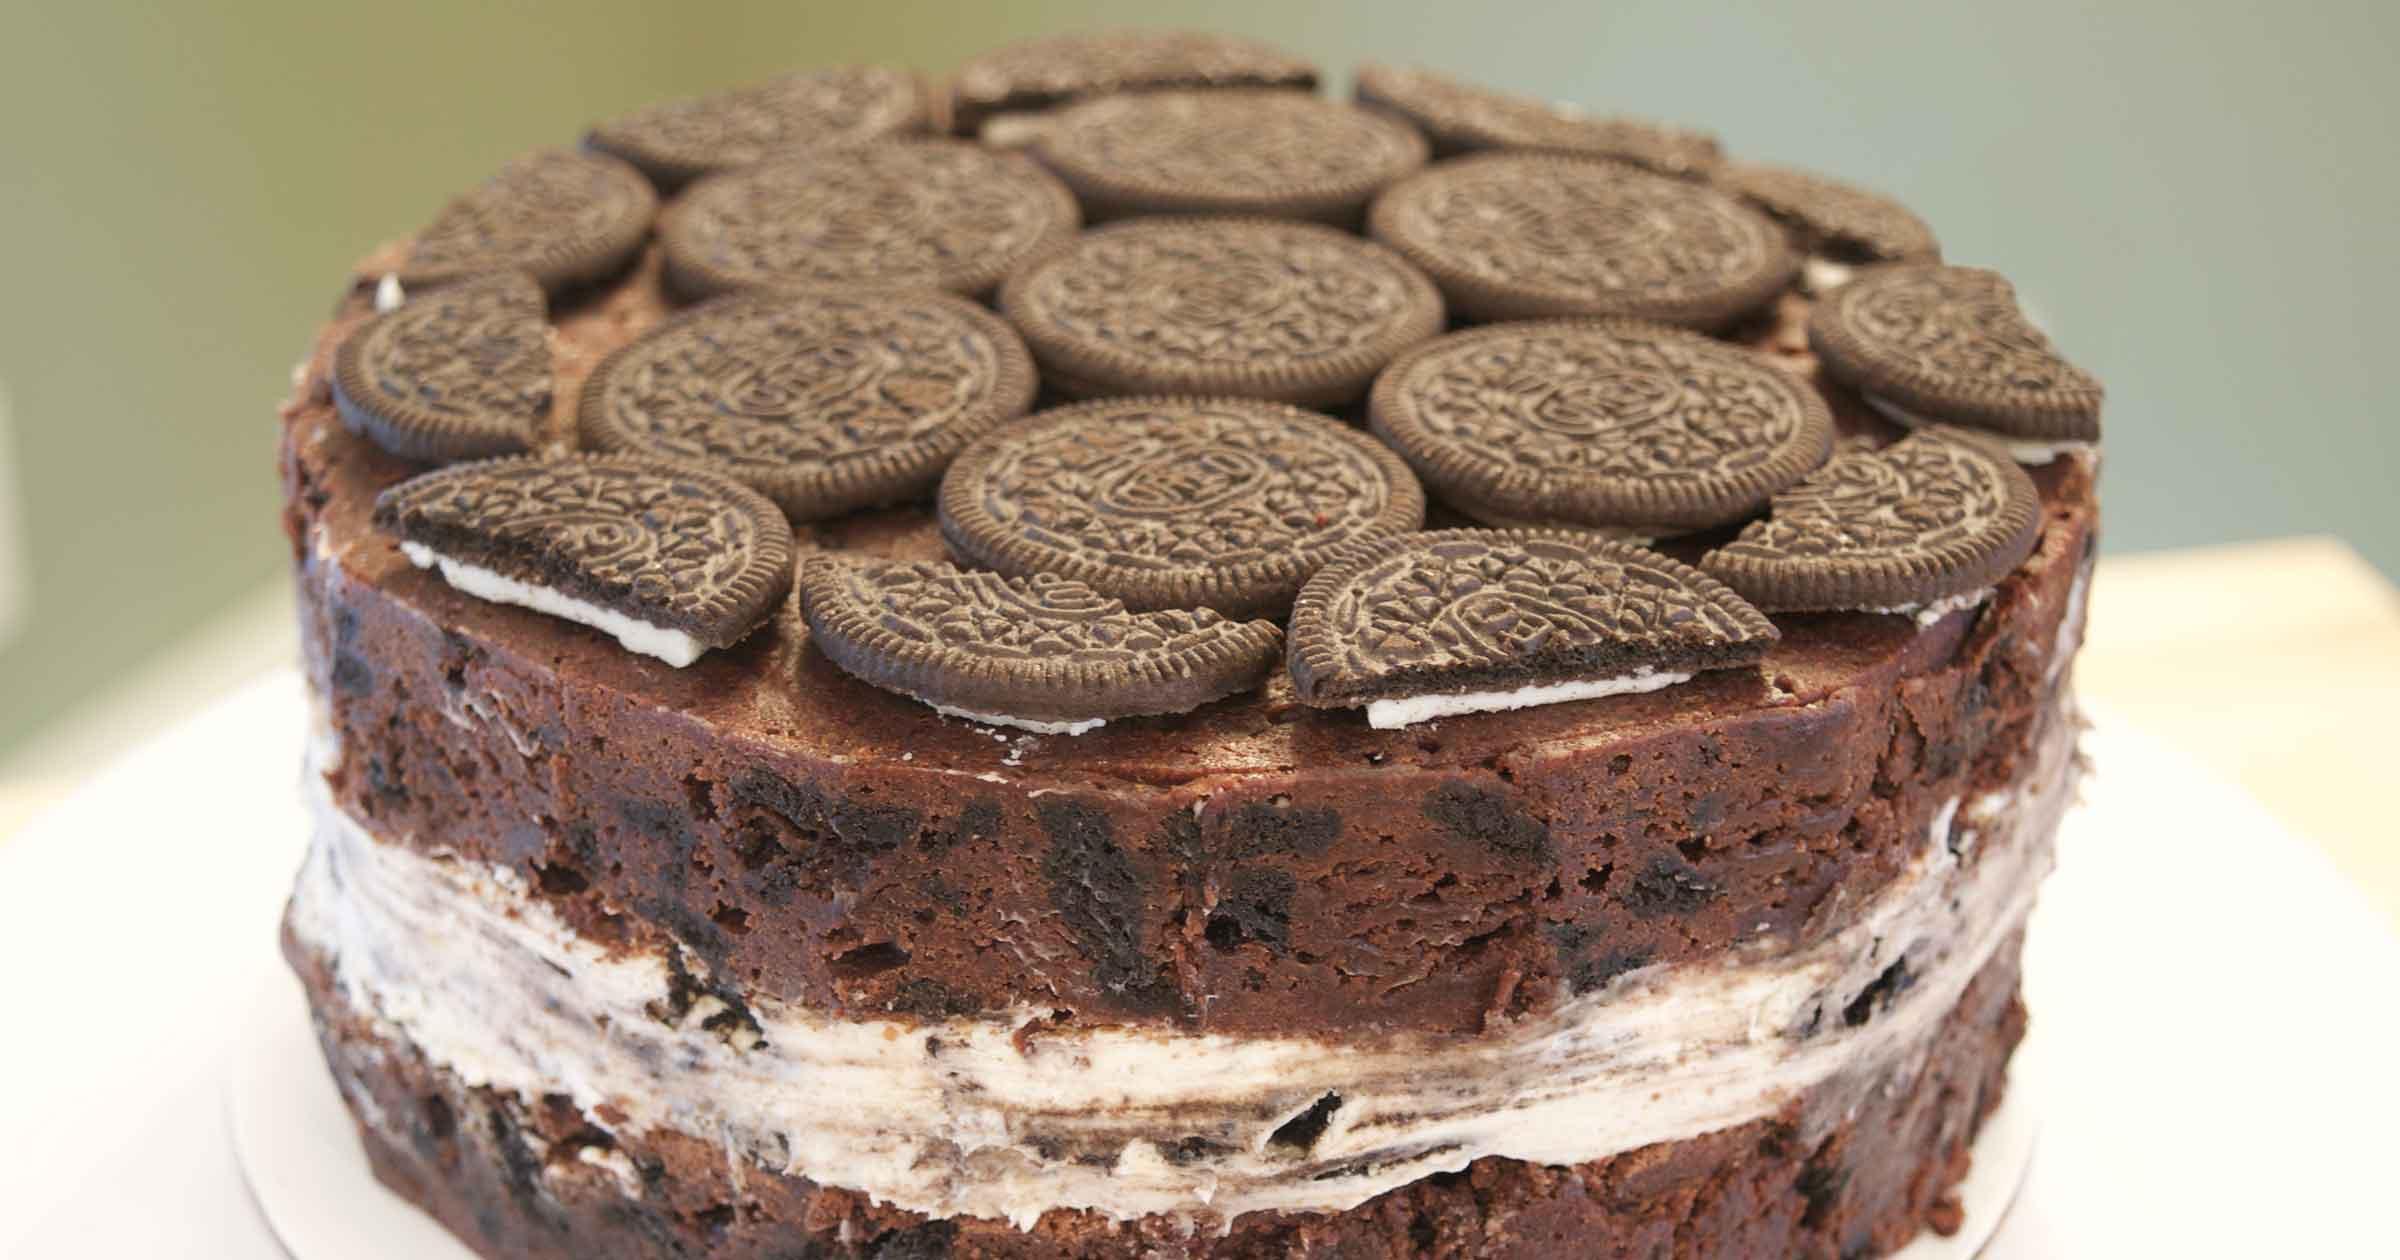 Top of the cake, covered with tightly packed Oreos